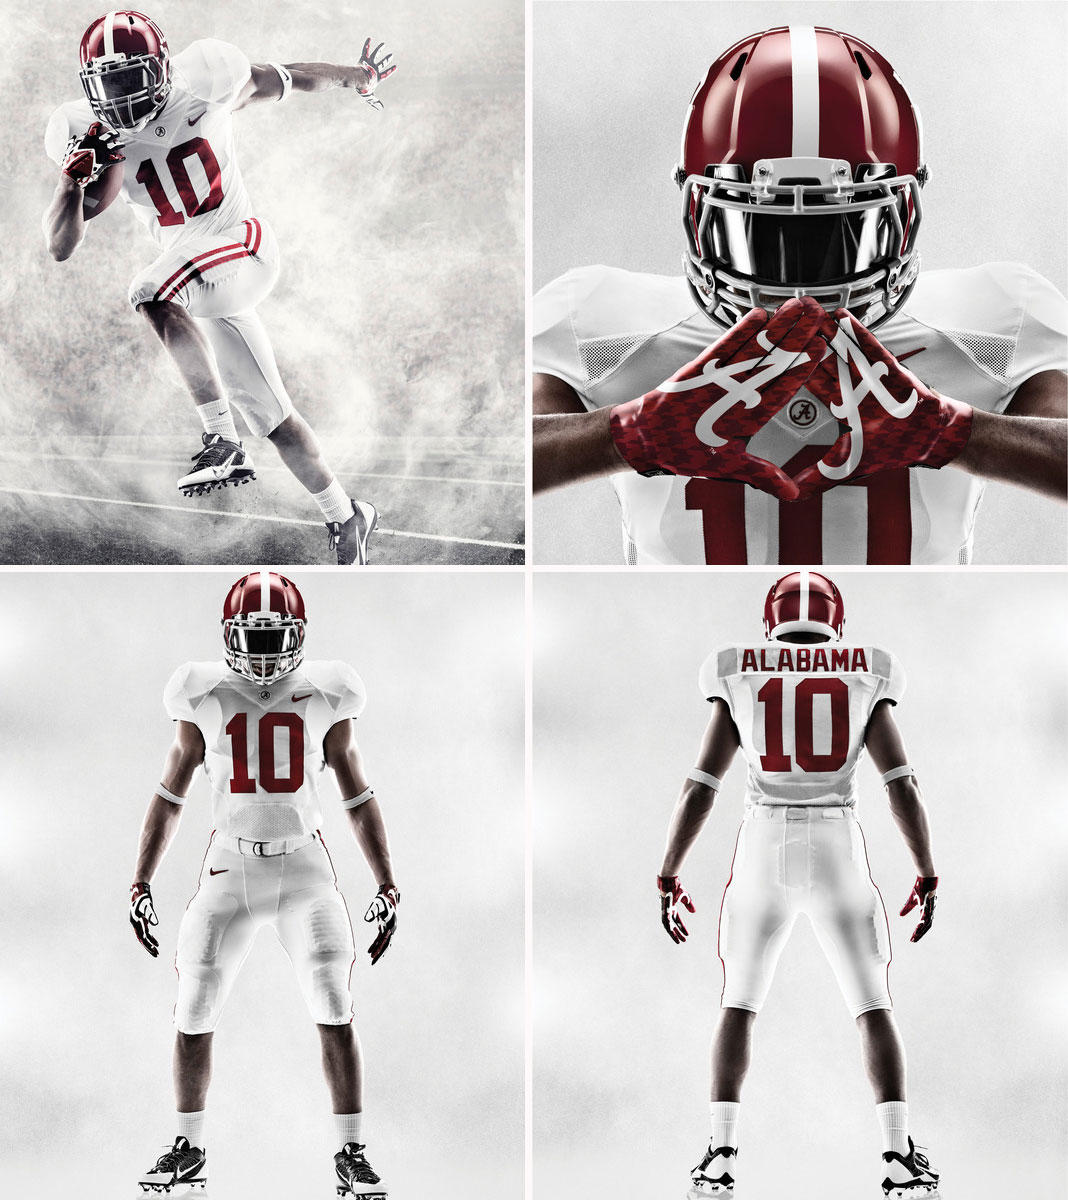 Bleacher Report on Twitter: "Alabama's new Nike Pro Combat for the BCS National Championship game http://t.co/cuFGFWfC" /